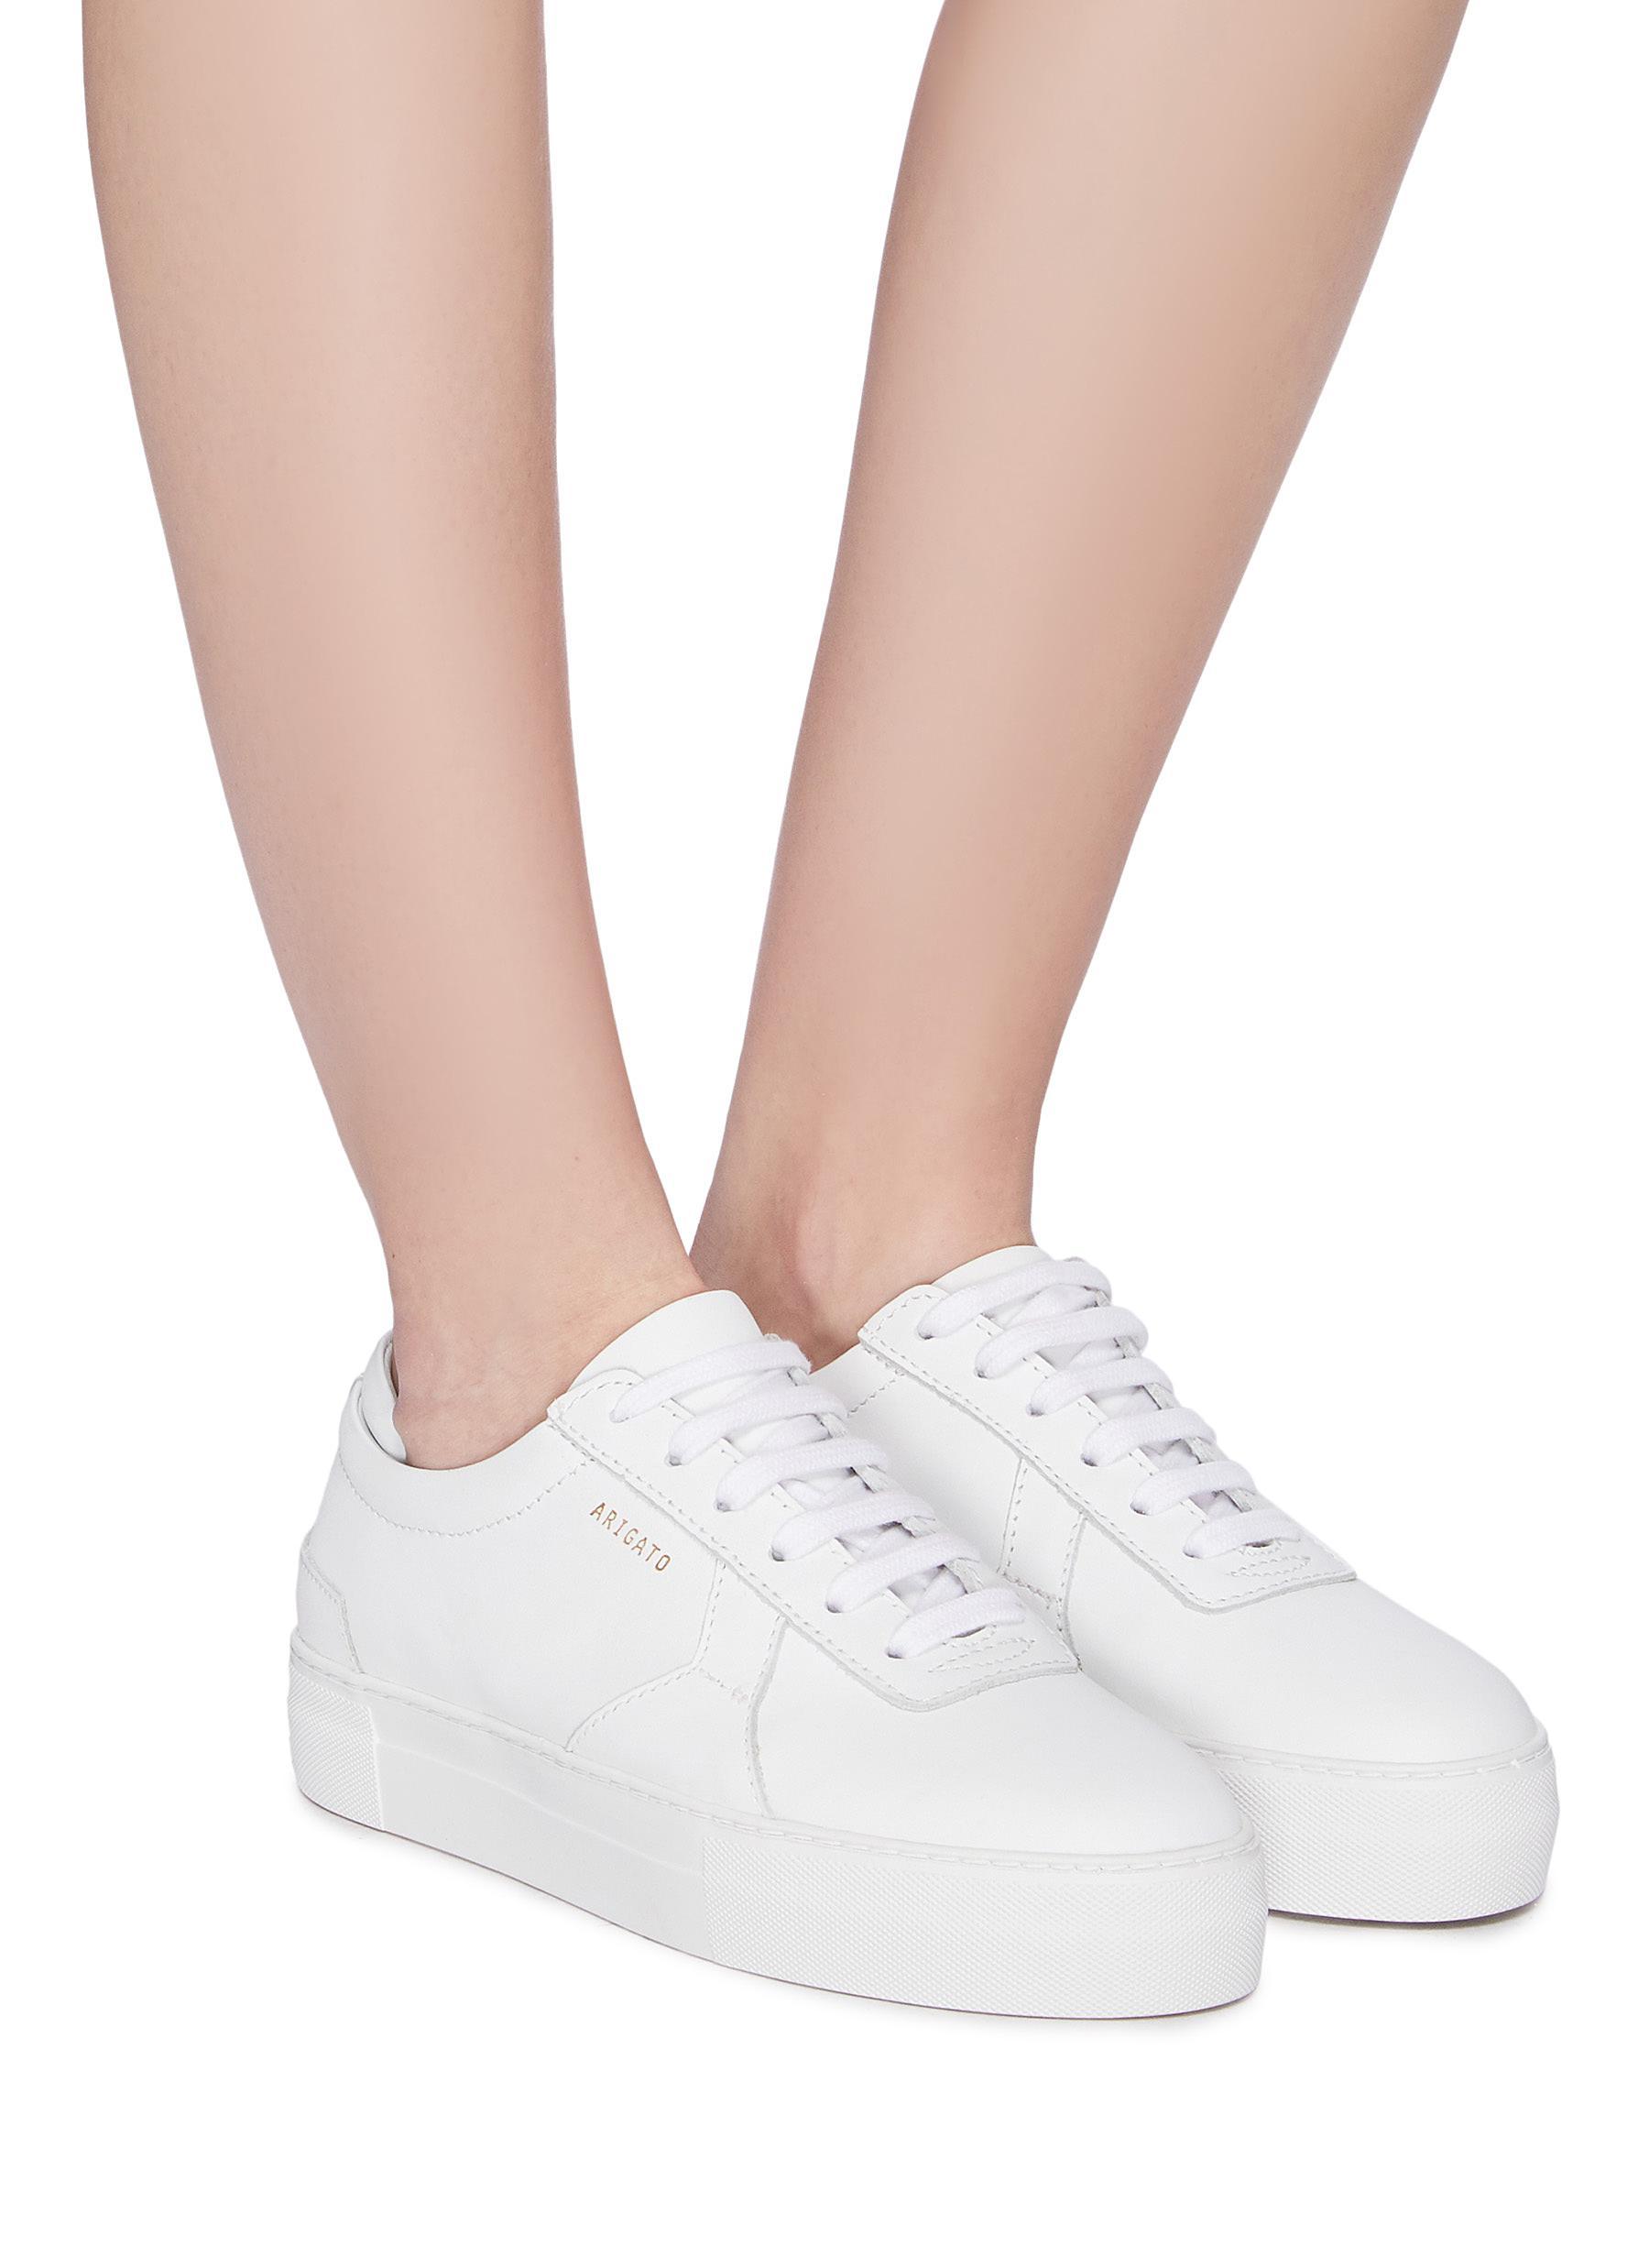 Axel Arigato Platform Leather Sneakers in White - Save 43% - Lyst